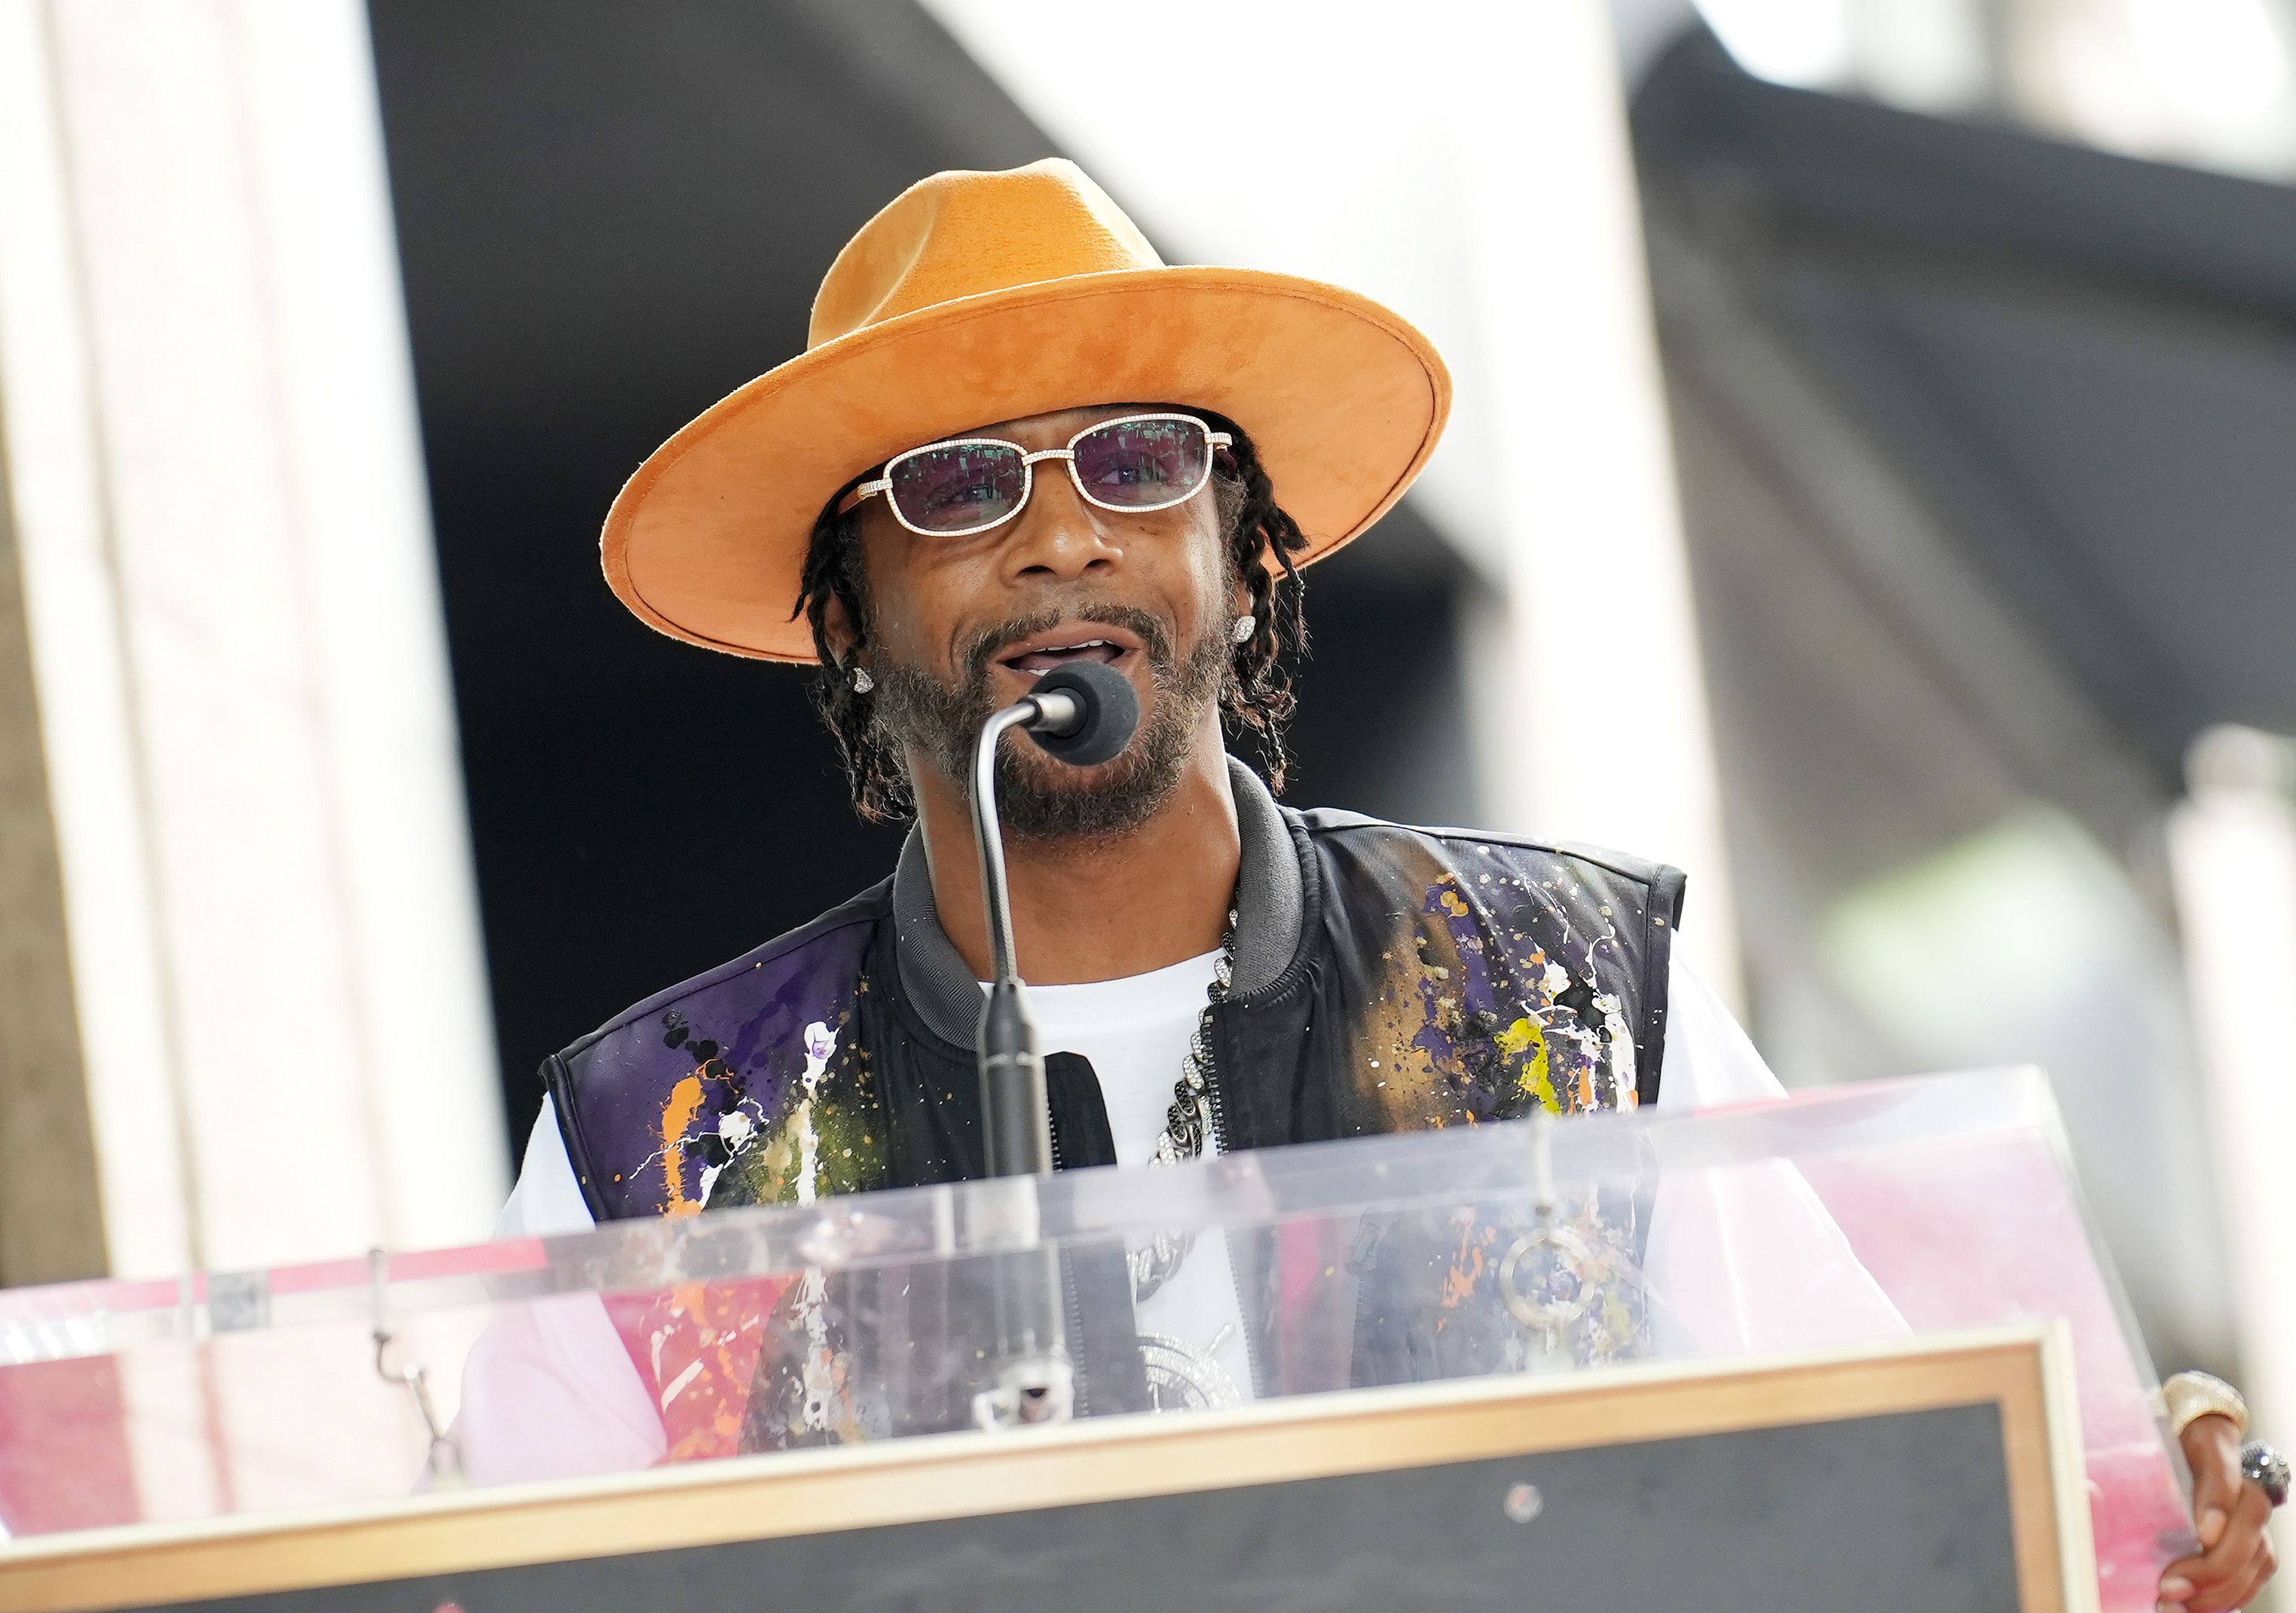 Katt Williams is coming to Tampa next month with two performances